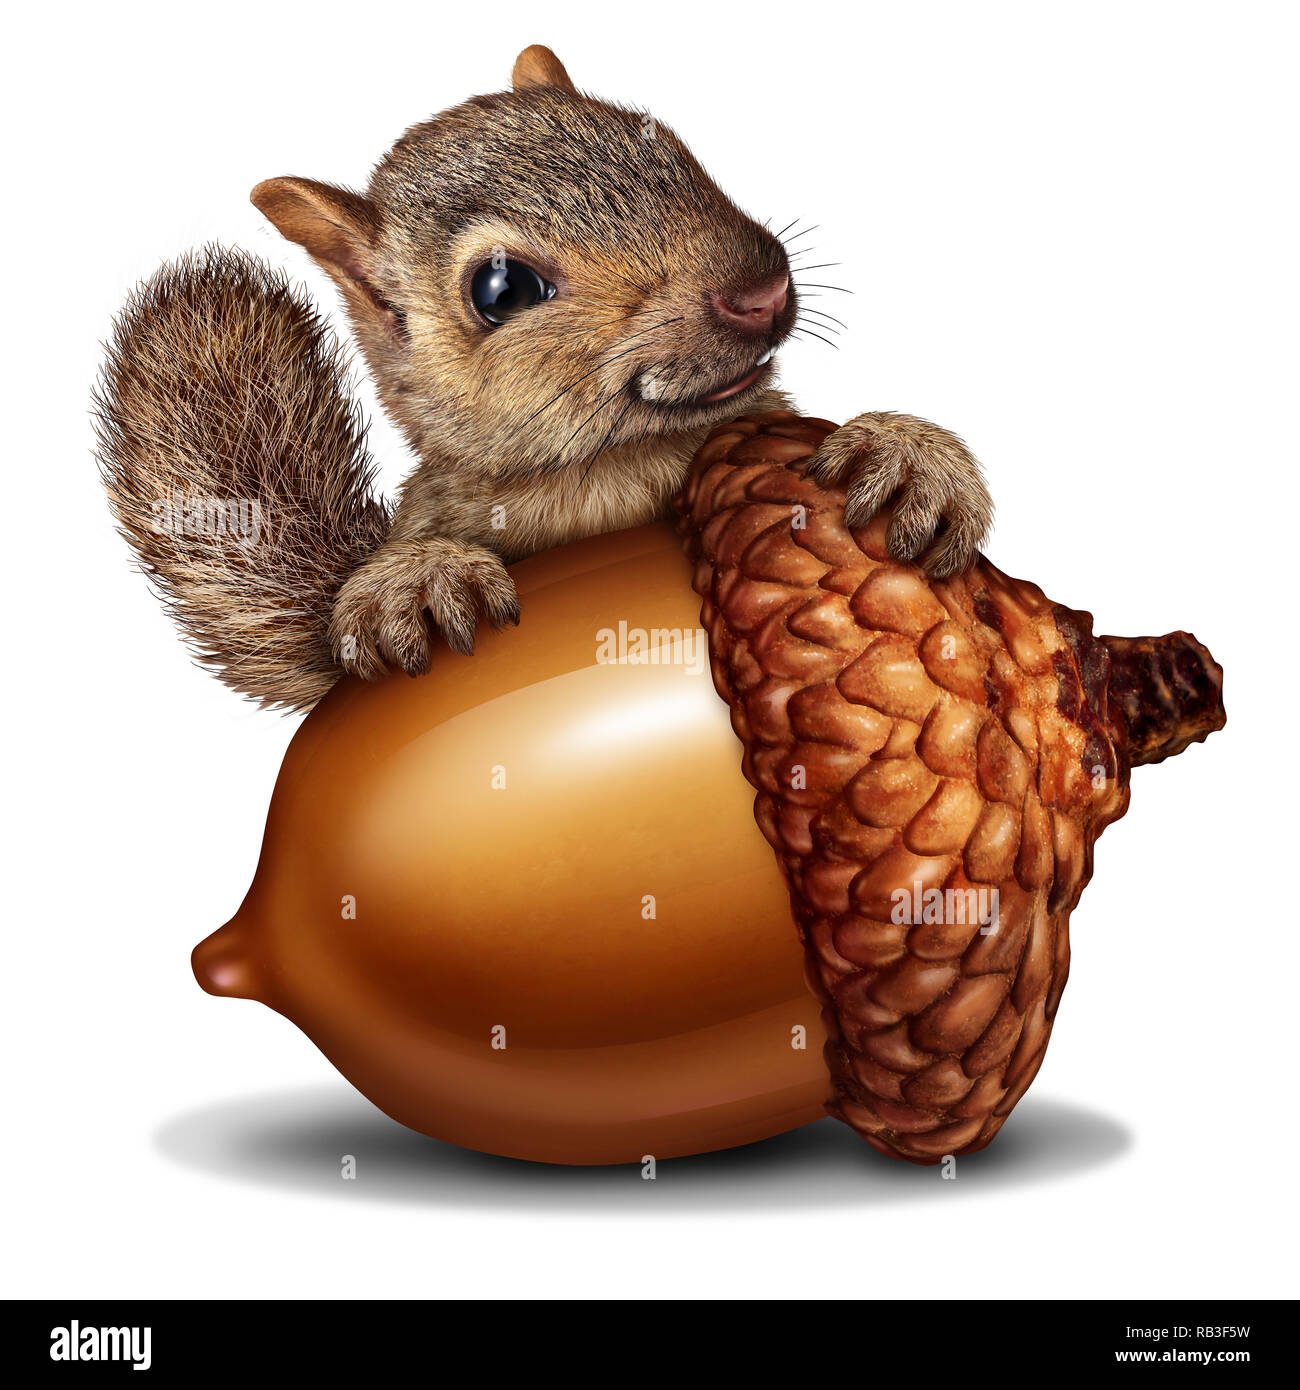 Funny squirrel holding a giant acorn tree nut as a wealth or wealthy metaphor for business and financial savings in a 3D illustration style. Stock Photo